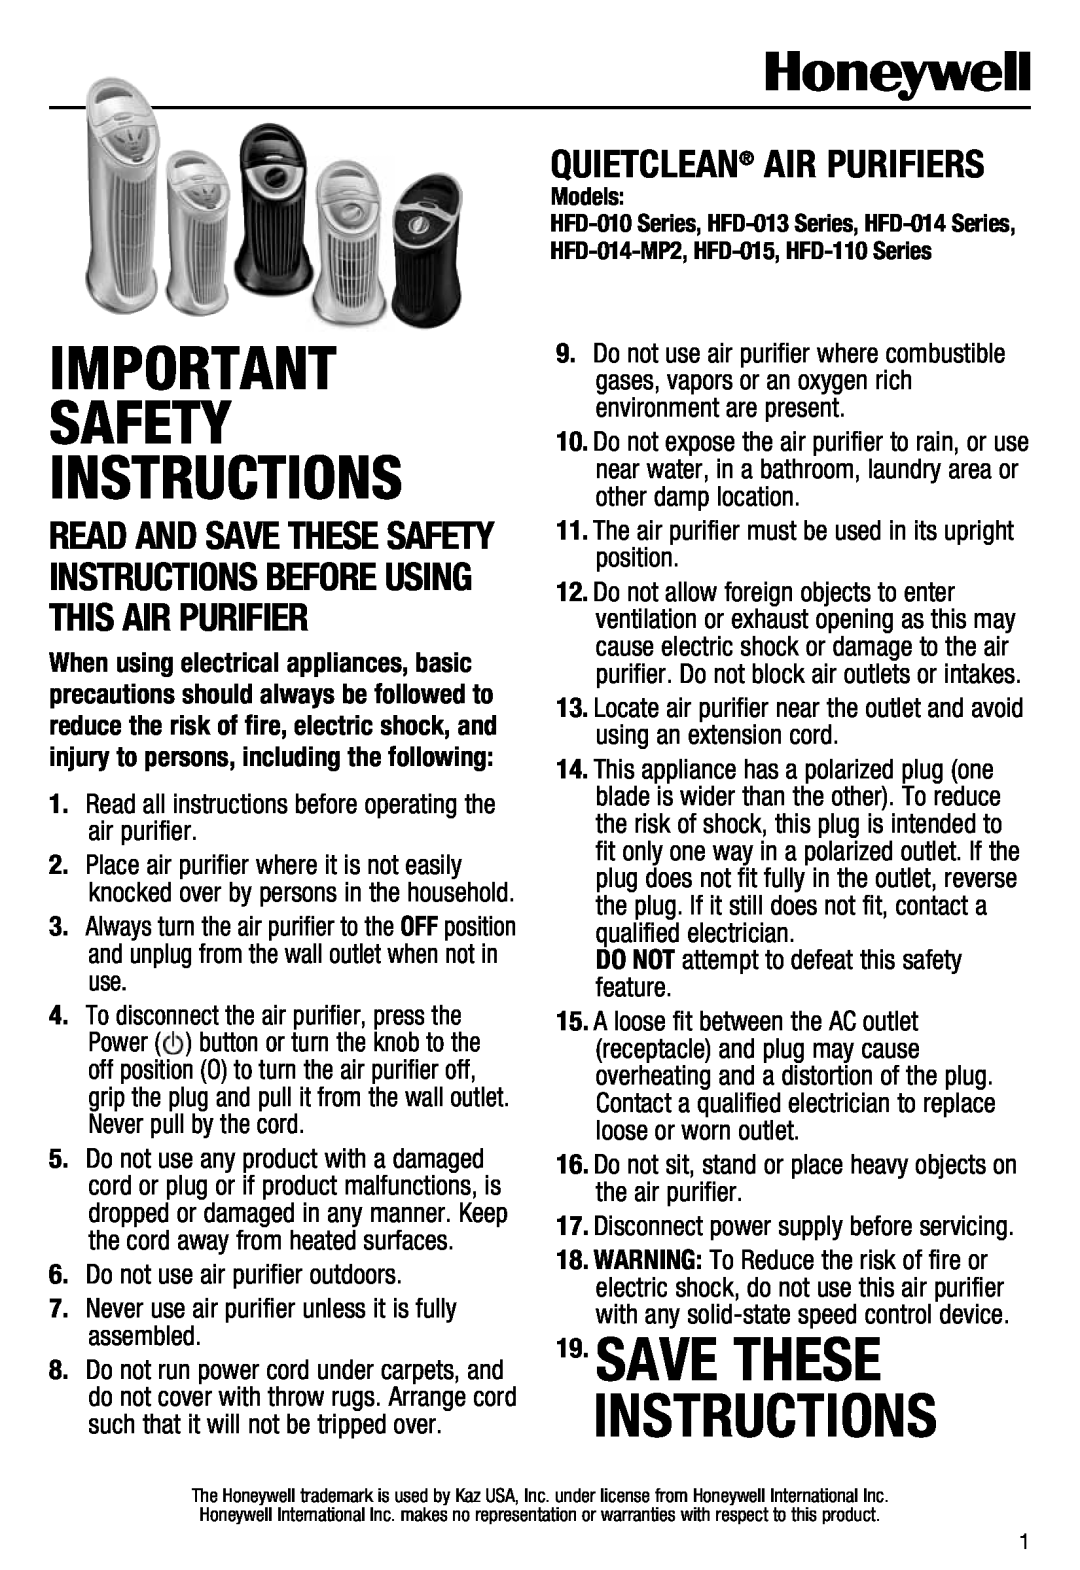 Honeywell HFD110 important safety instructions Important Safety Instructions, Save These Instructions 